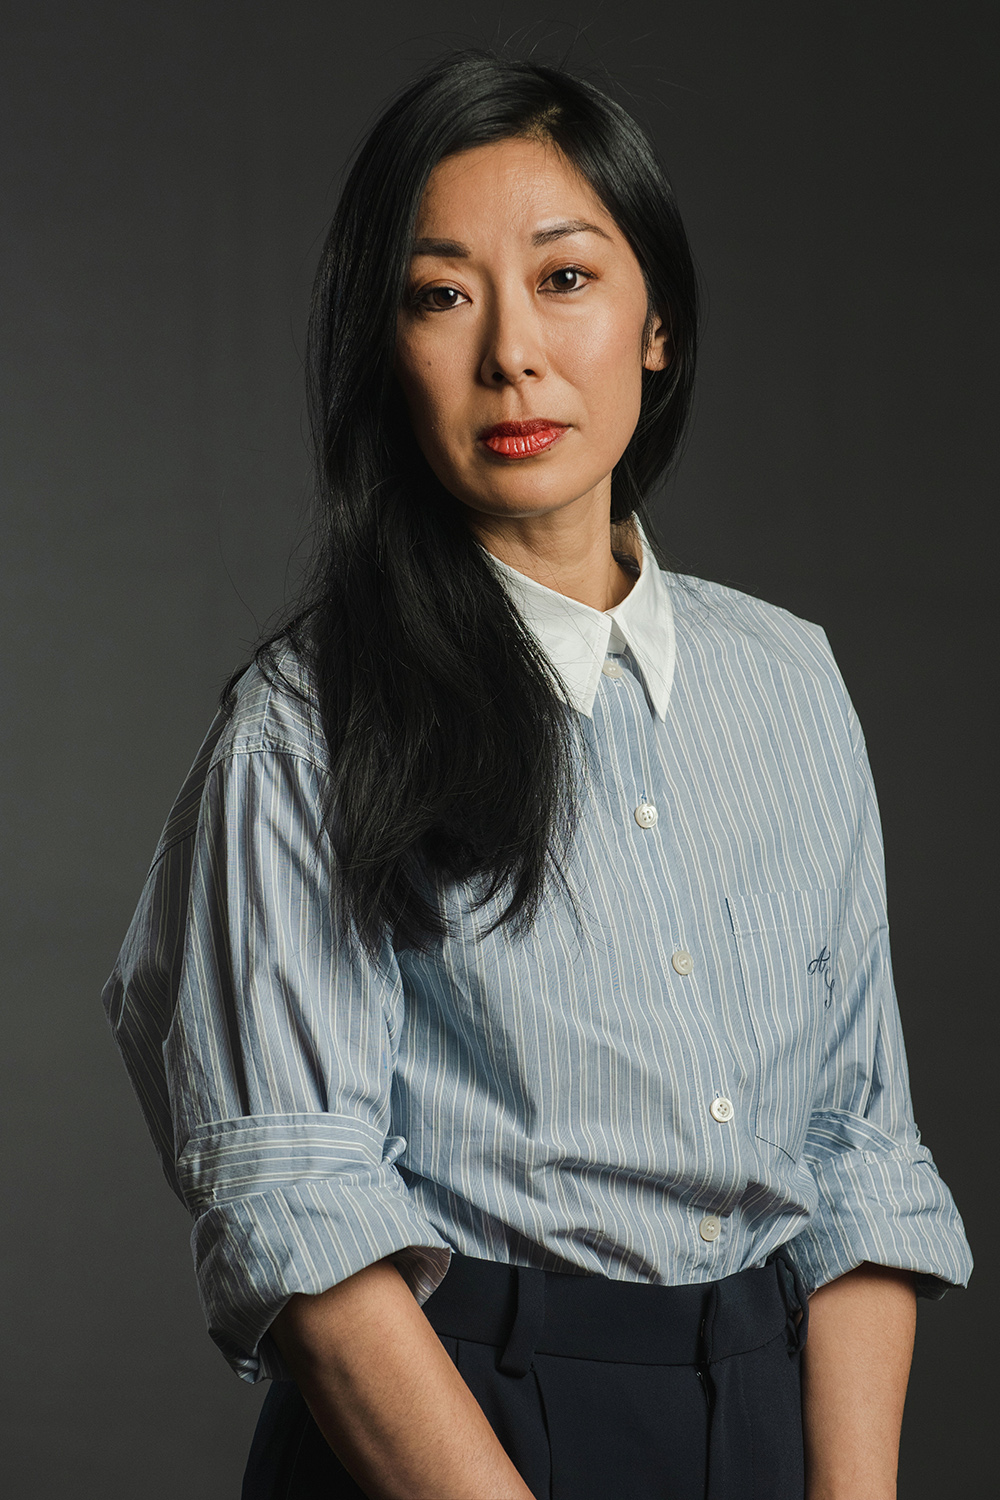 Color photograph of an Asian woman with long dark hair and a blue striped button up top with sleeves rolled, looking directly at the camera with a serious expression